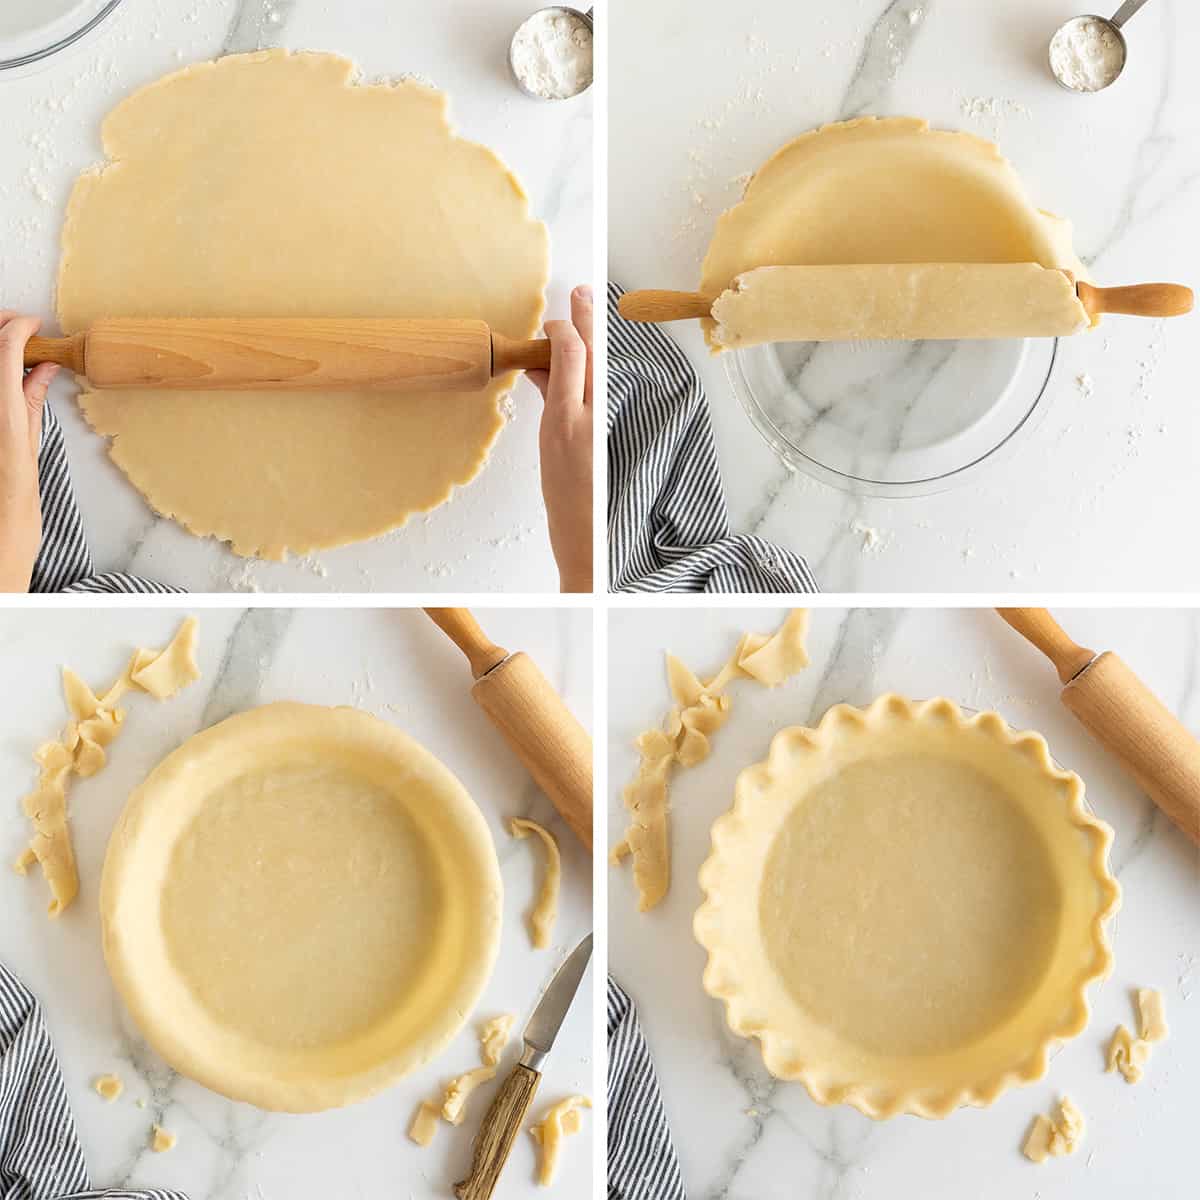 Four images of a rolling pin on a pie crust, the crust being transferred on the rolling pin to a pie plate, and a decorative fluted edge on the crust.